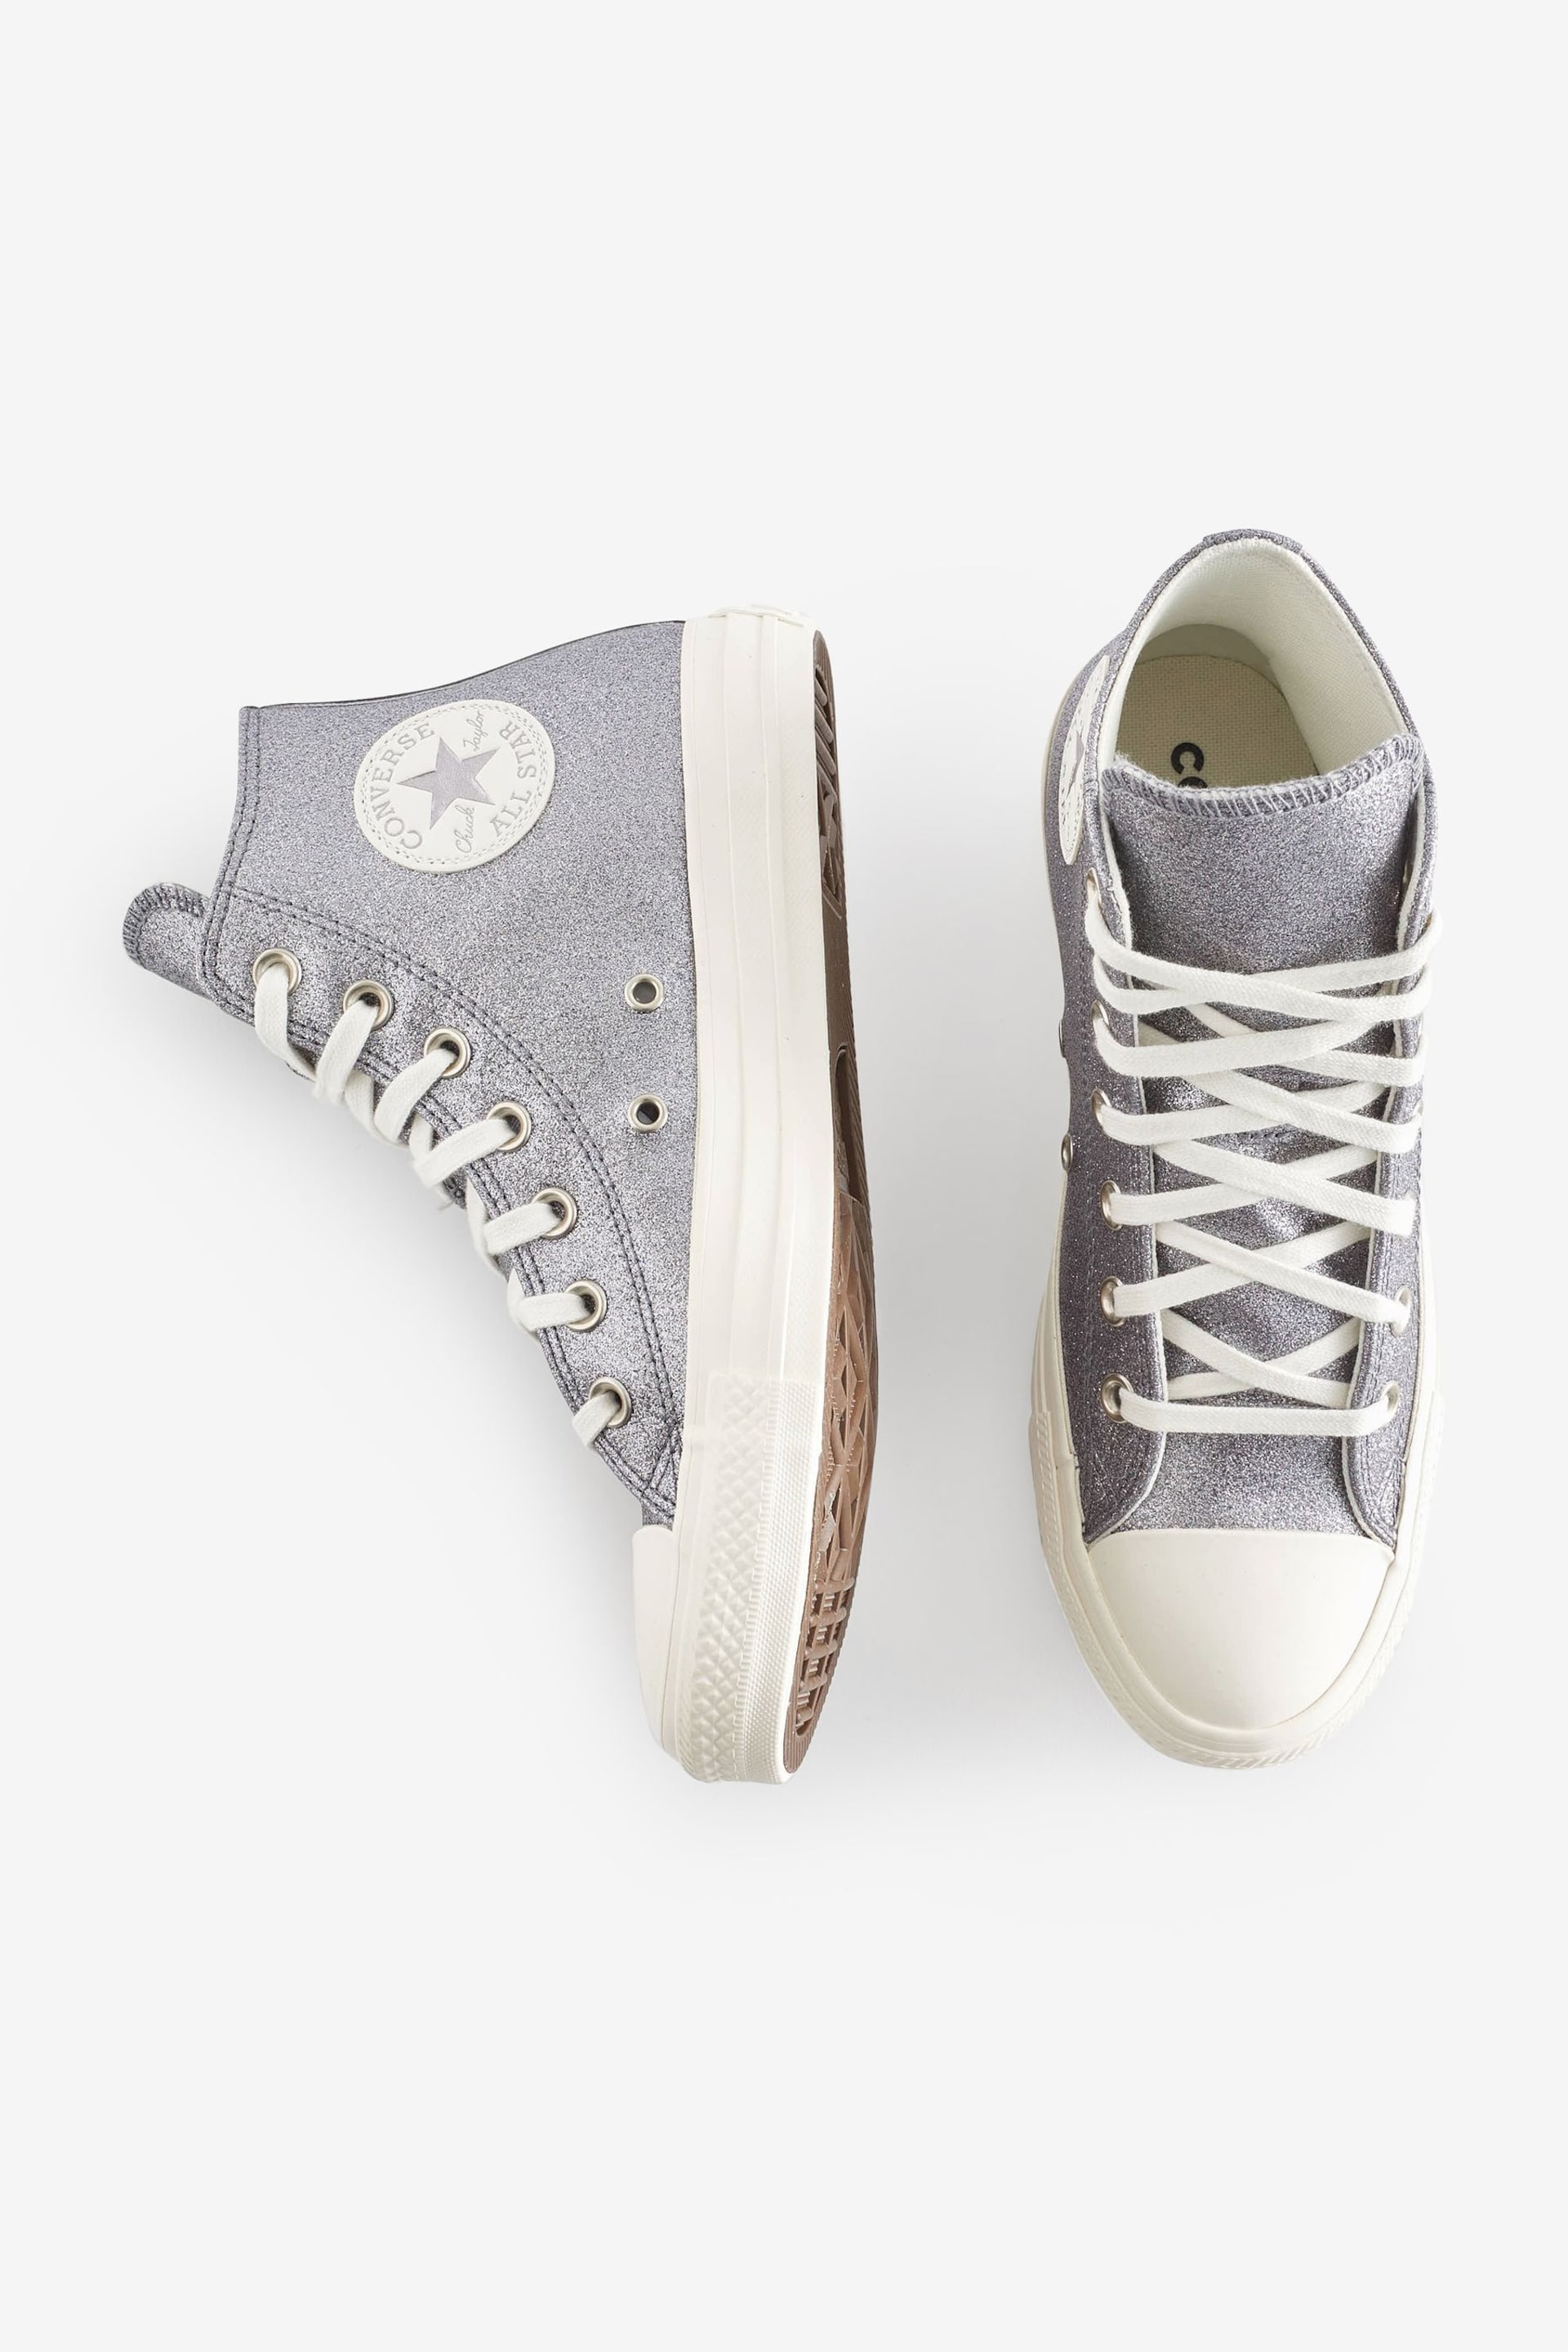 Converse Silver Silver Glitter High Top Trainers - Image 4 of 9